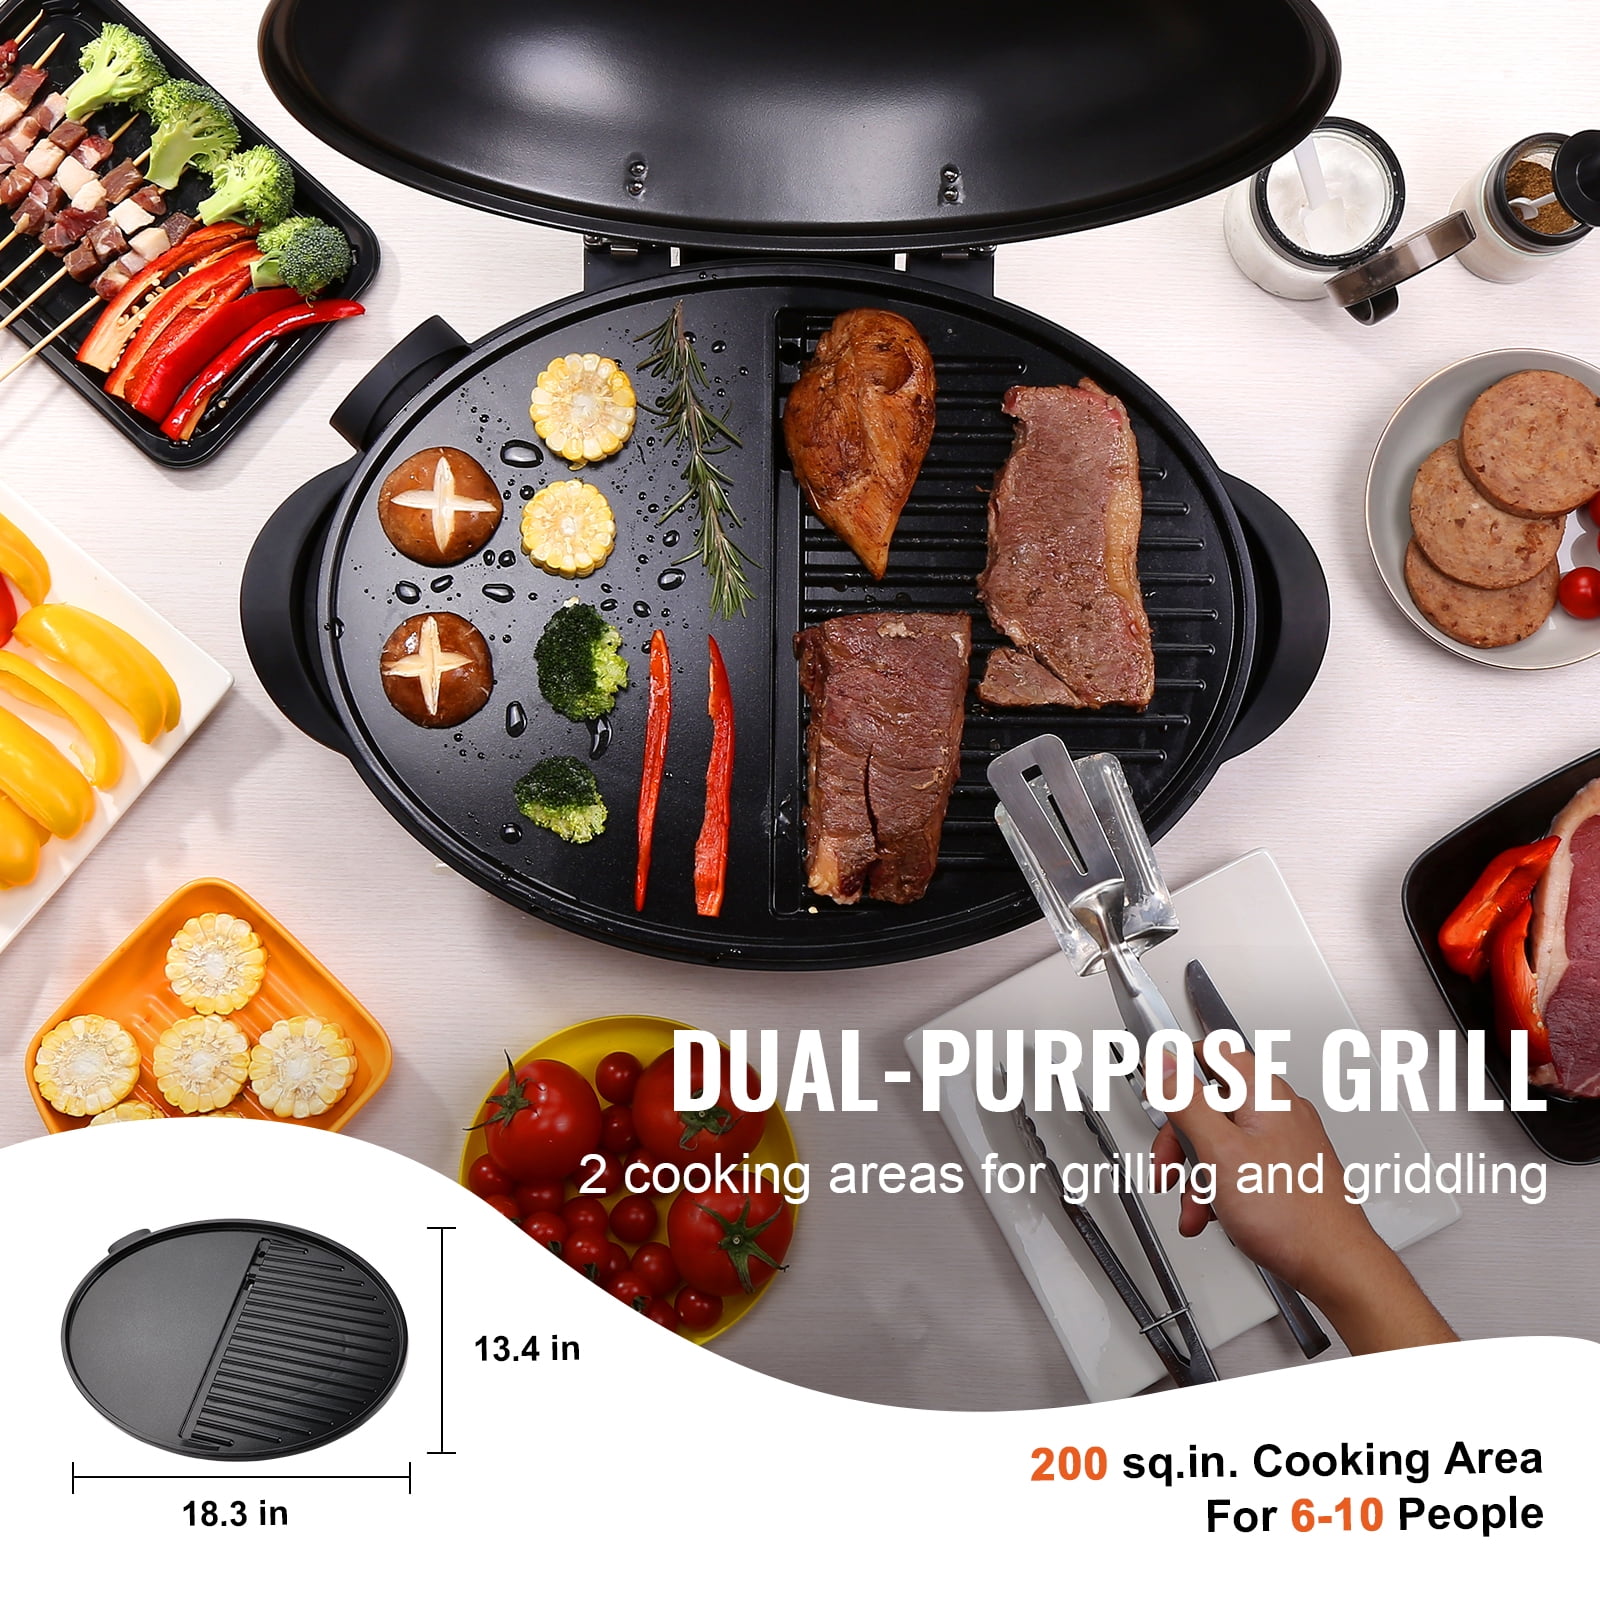 Smart-Enabled Electric Grills : Current Model G Dual-Zone Electric Grill